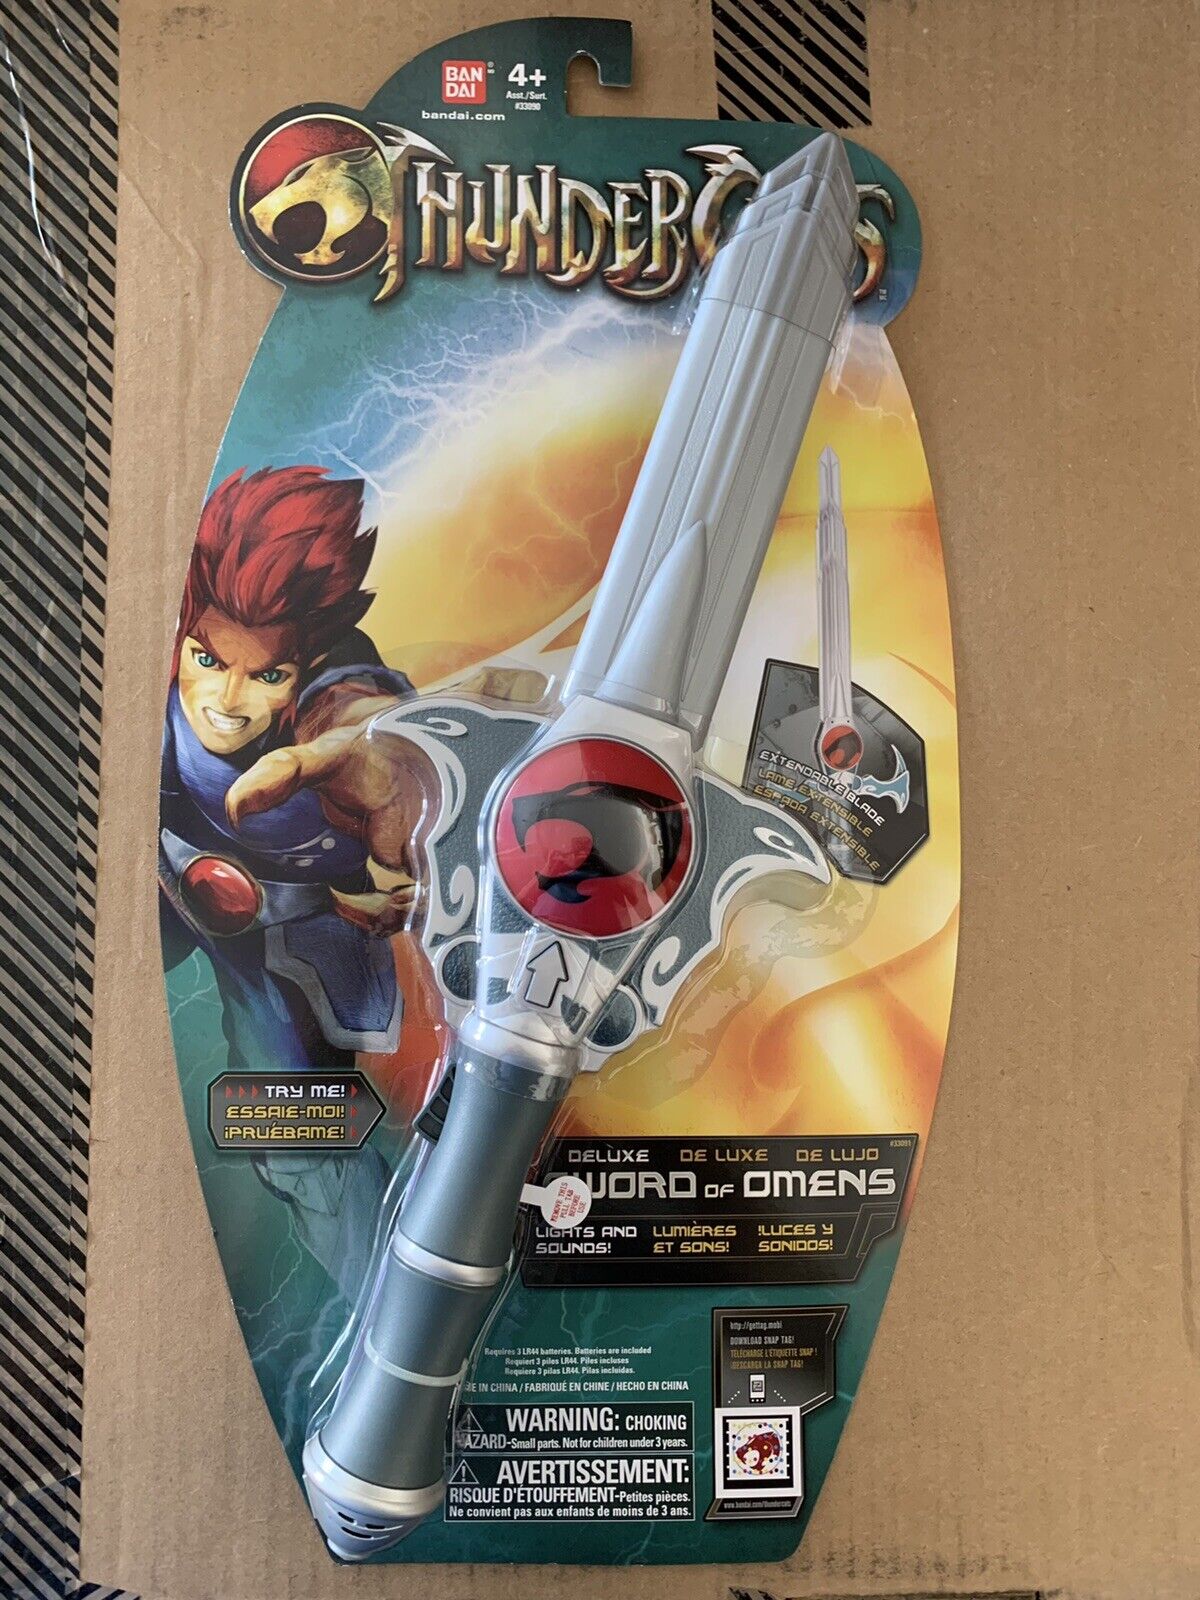 Thundercats BANDAI 豊富なギフト Sword Of 93%OFF Omens Extendable And So Blade Lights